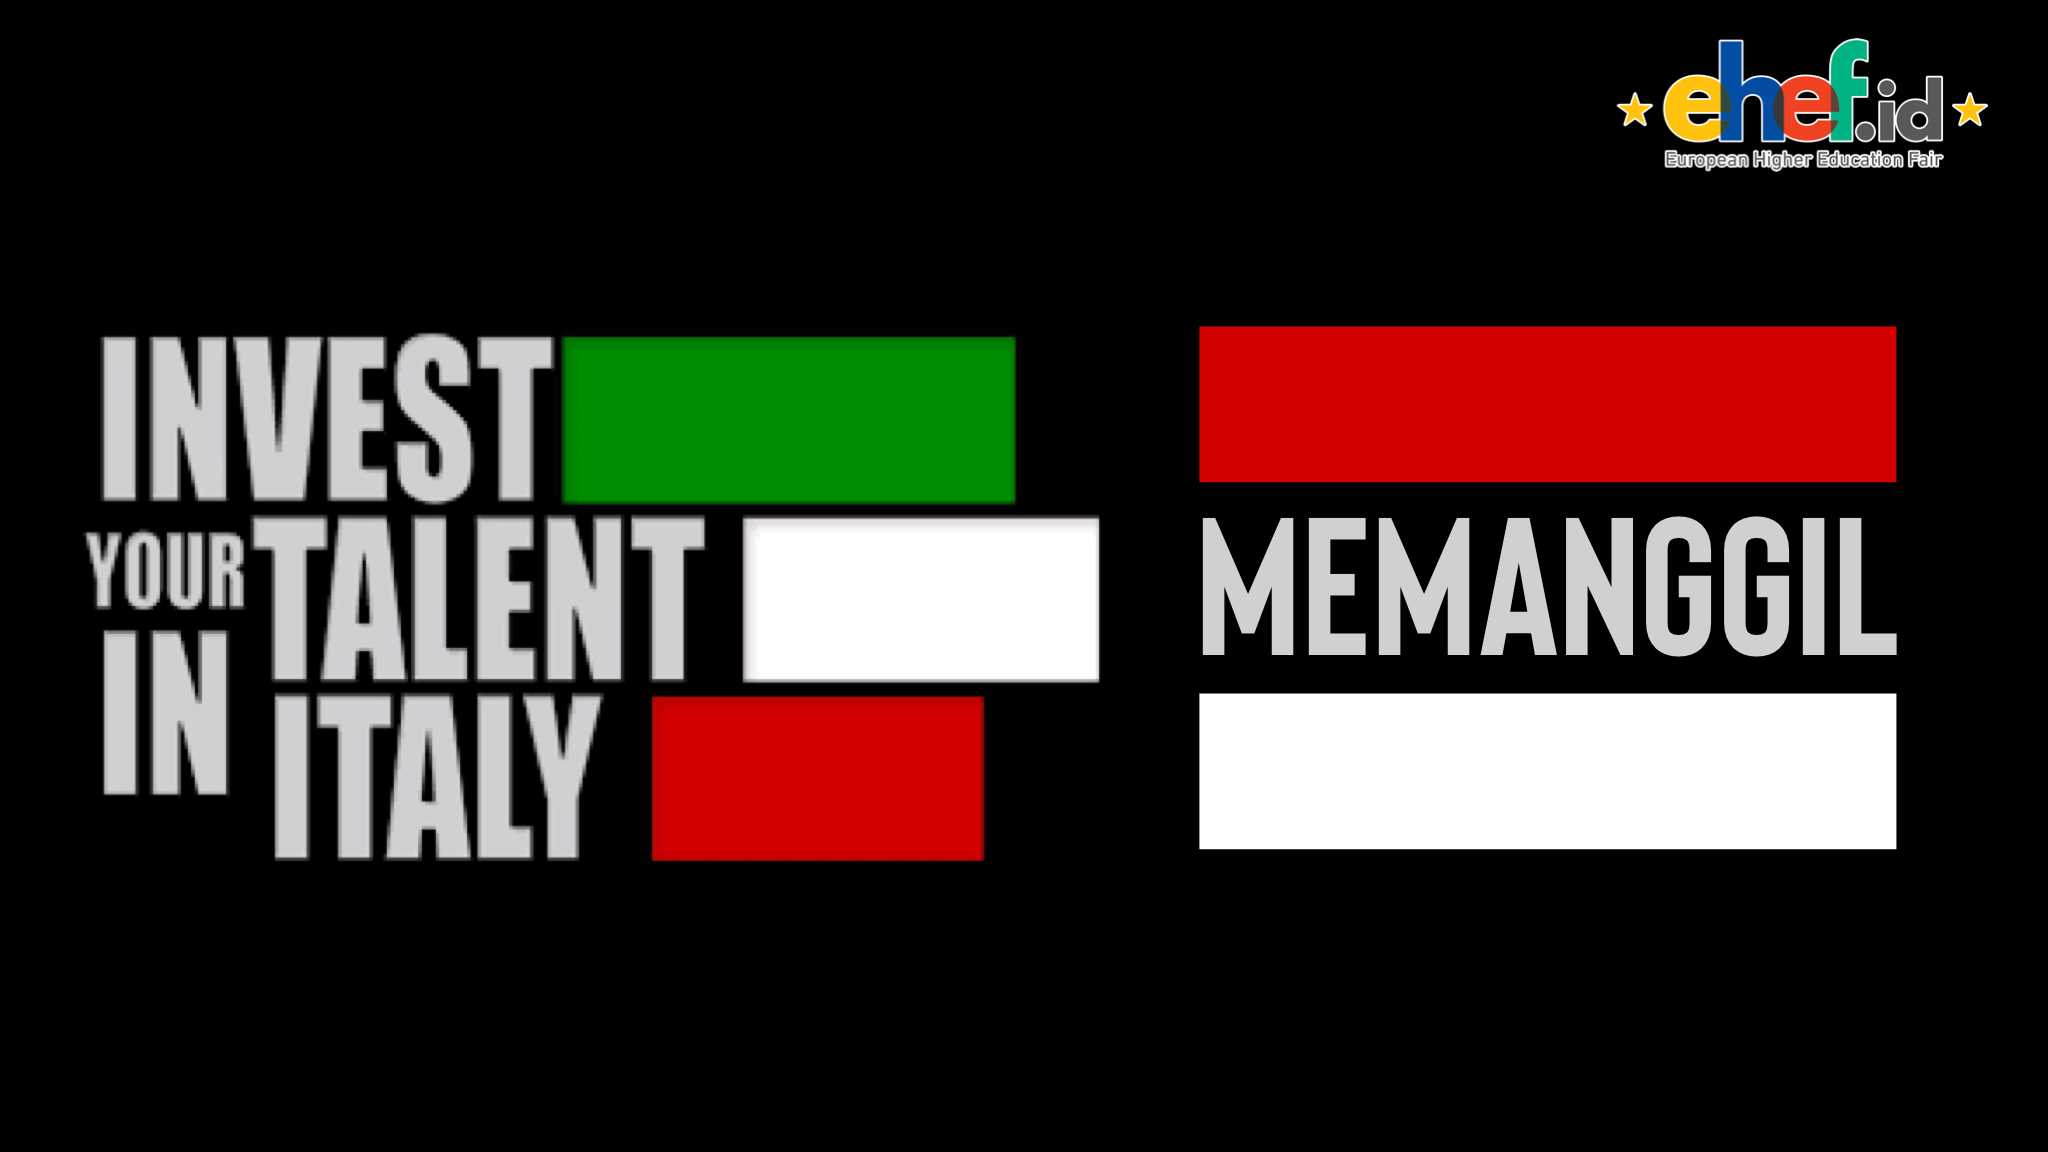 'Invest Your Talent in Italy' Memanggil 🇮🇩